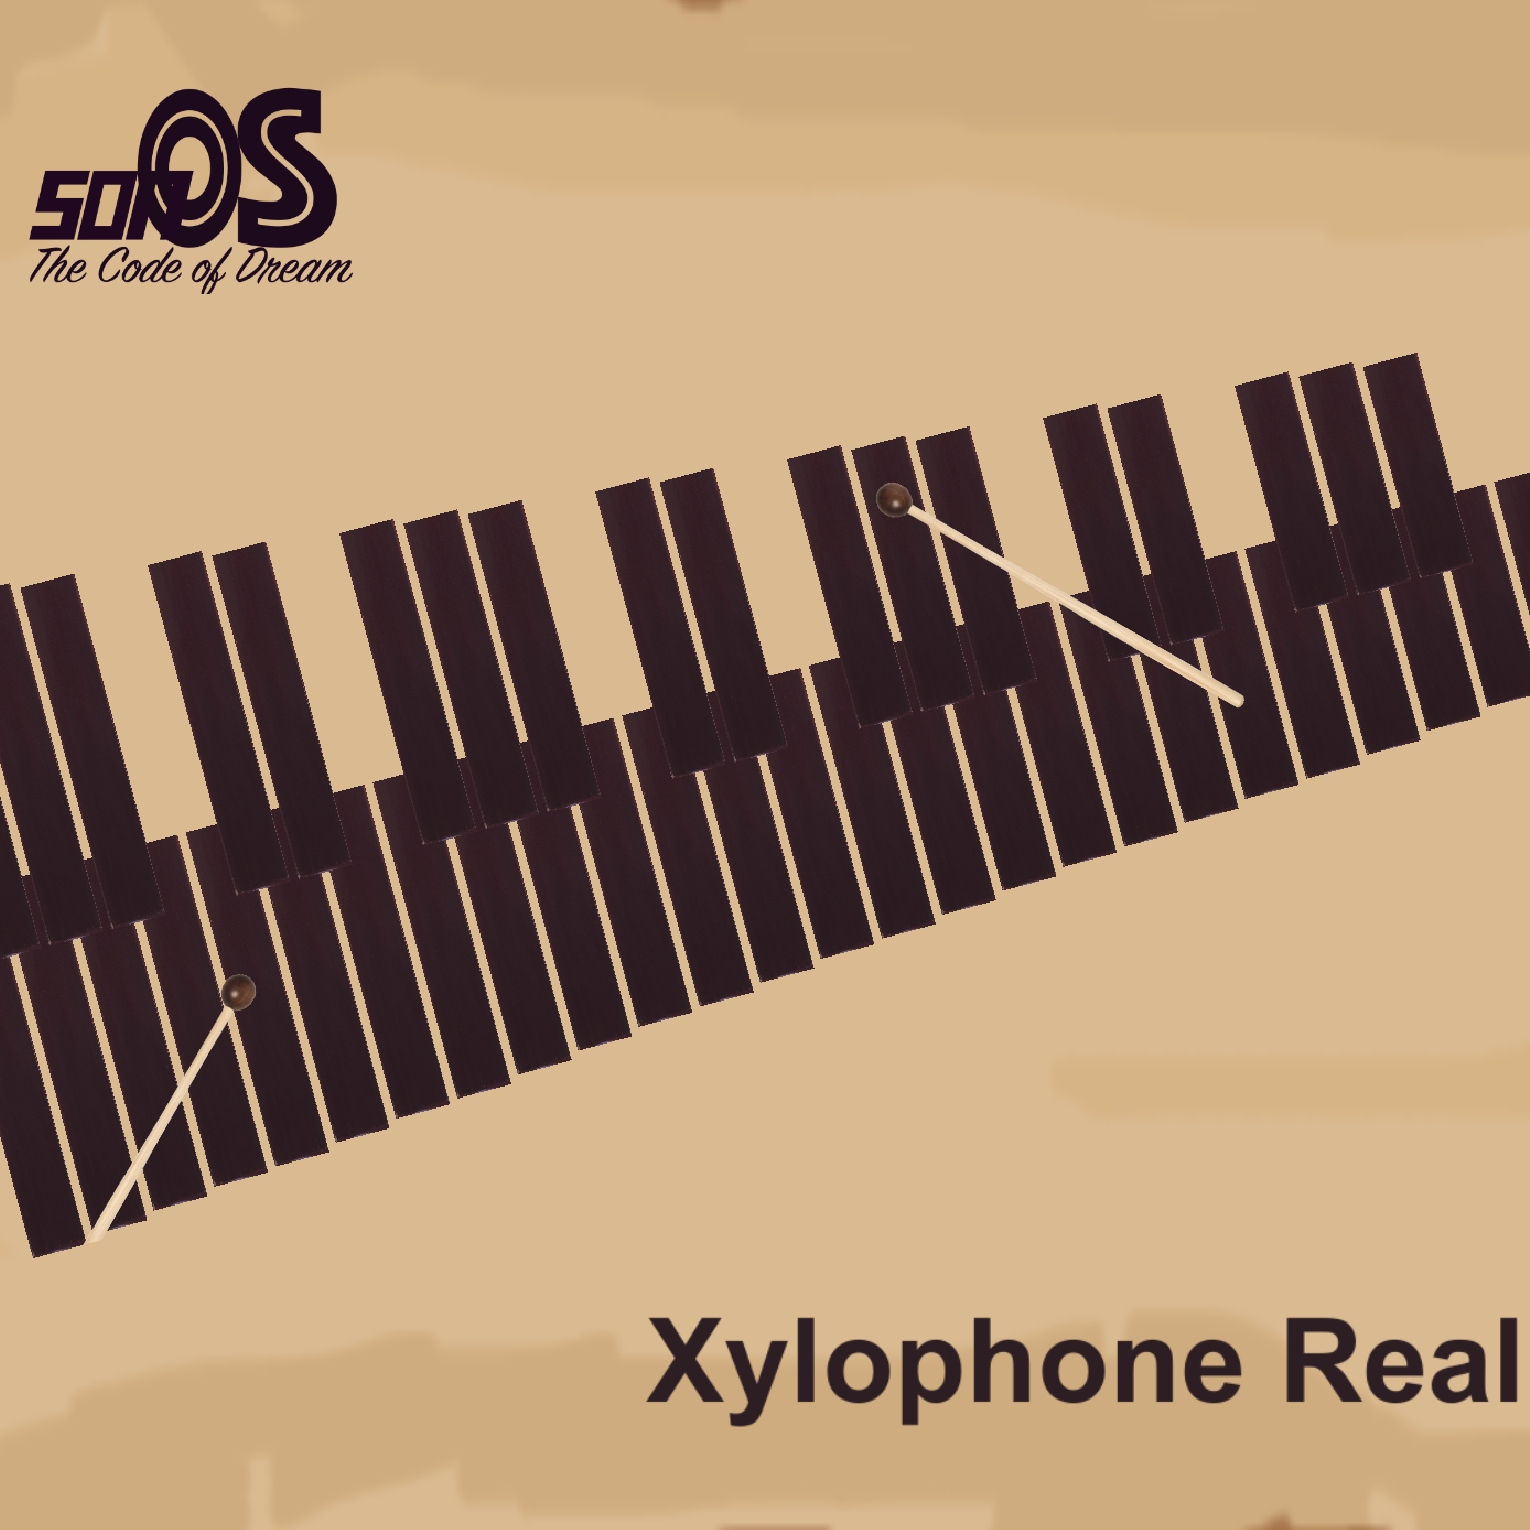 xylophone roll ringtone download